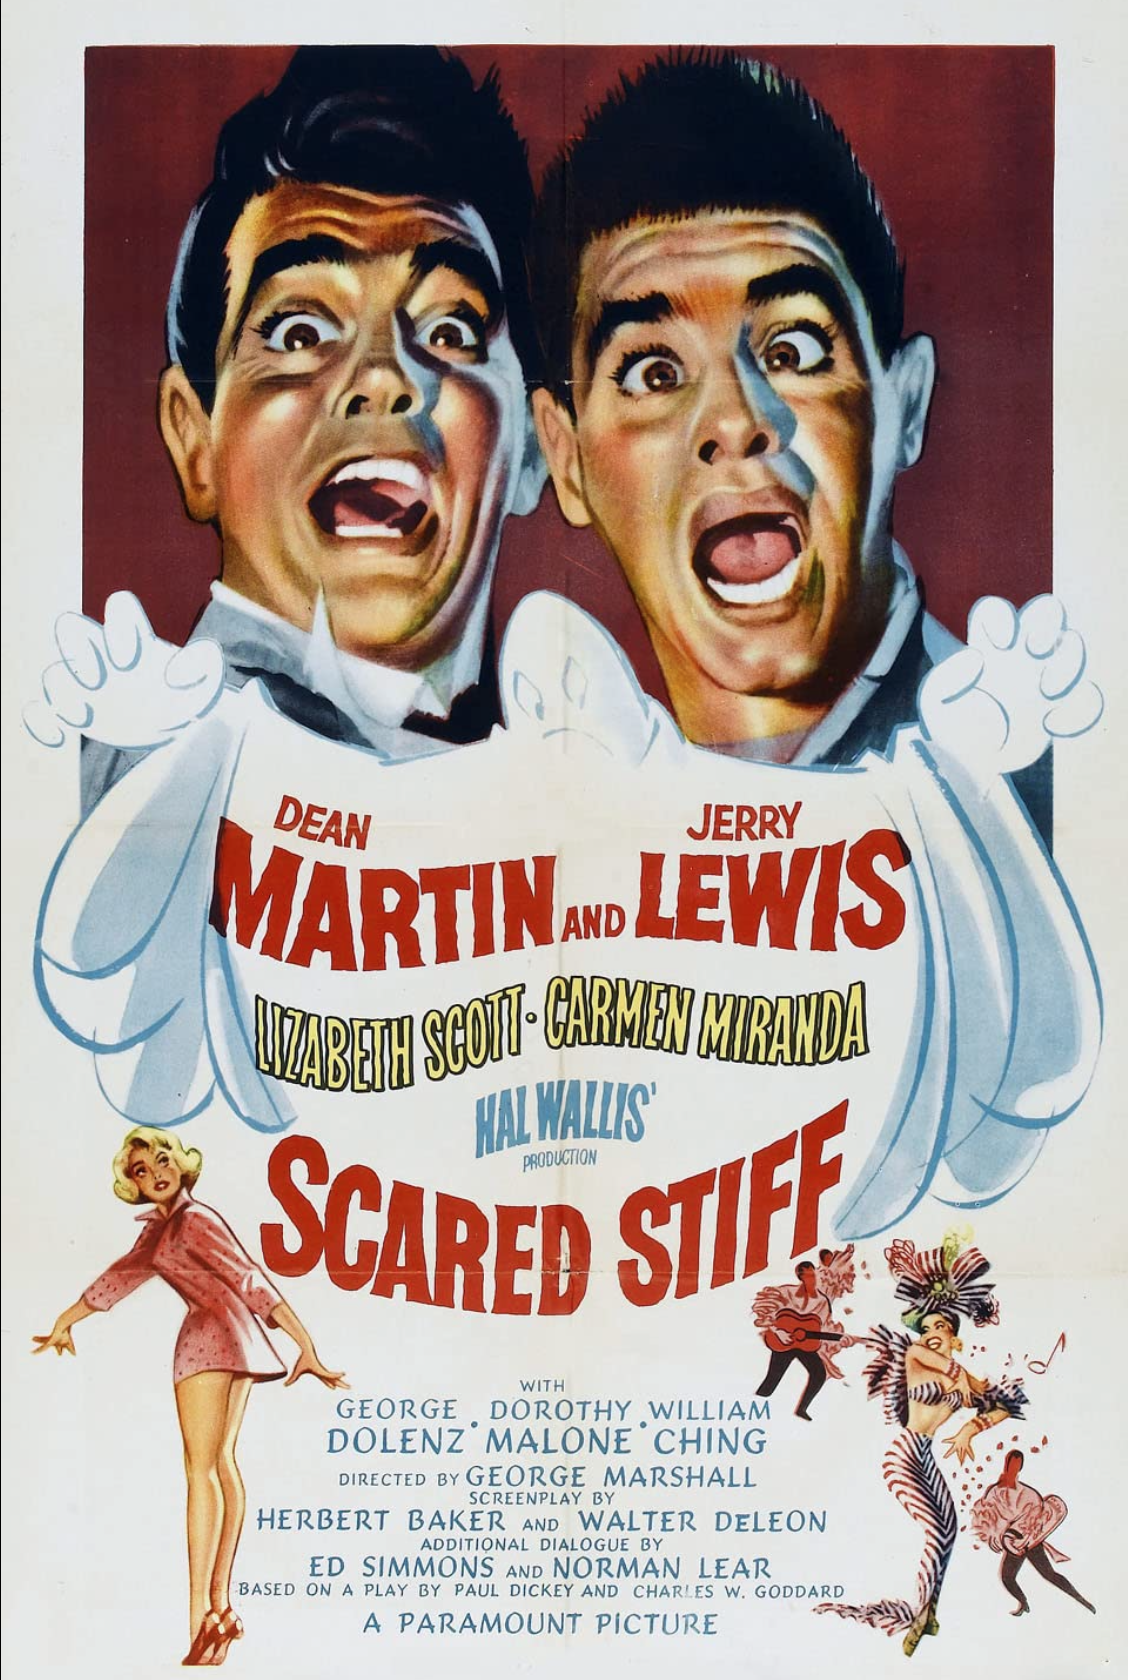 VIDEO: Pepito’s Filmography: “Scared Stiff” Starring Dean Martin & Jerry Lewis (1953)